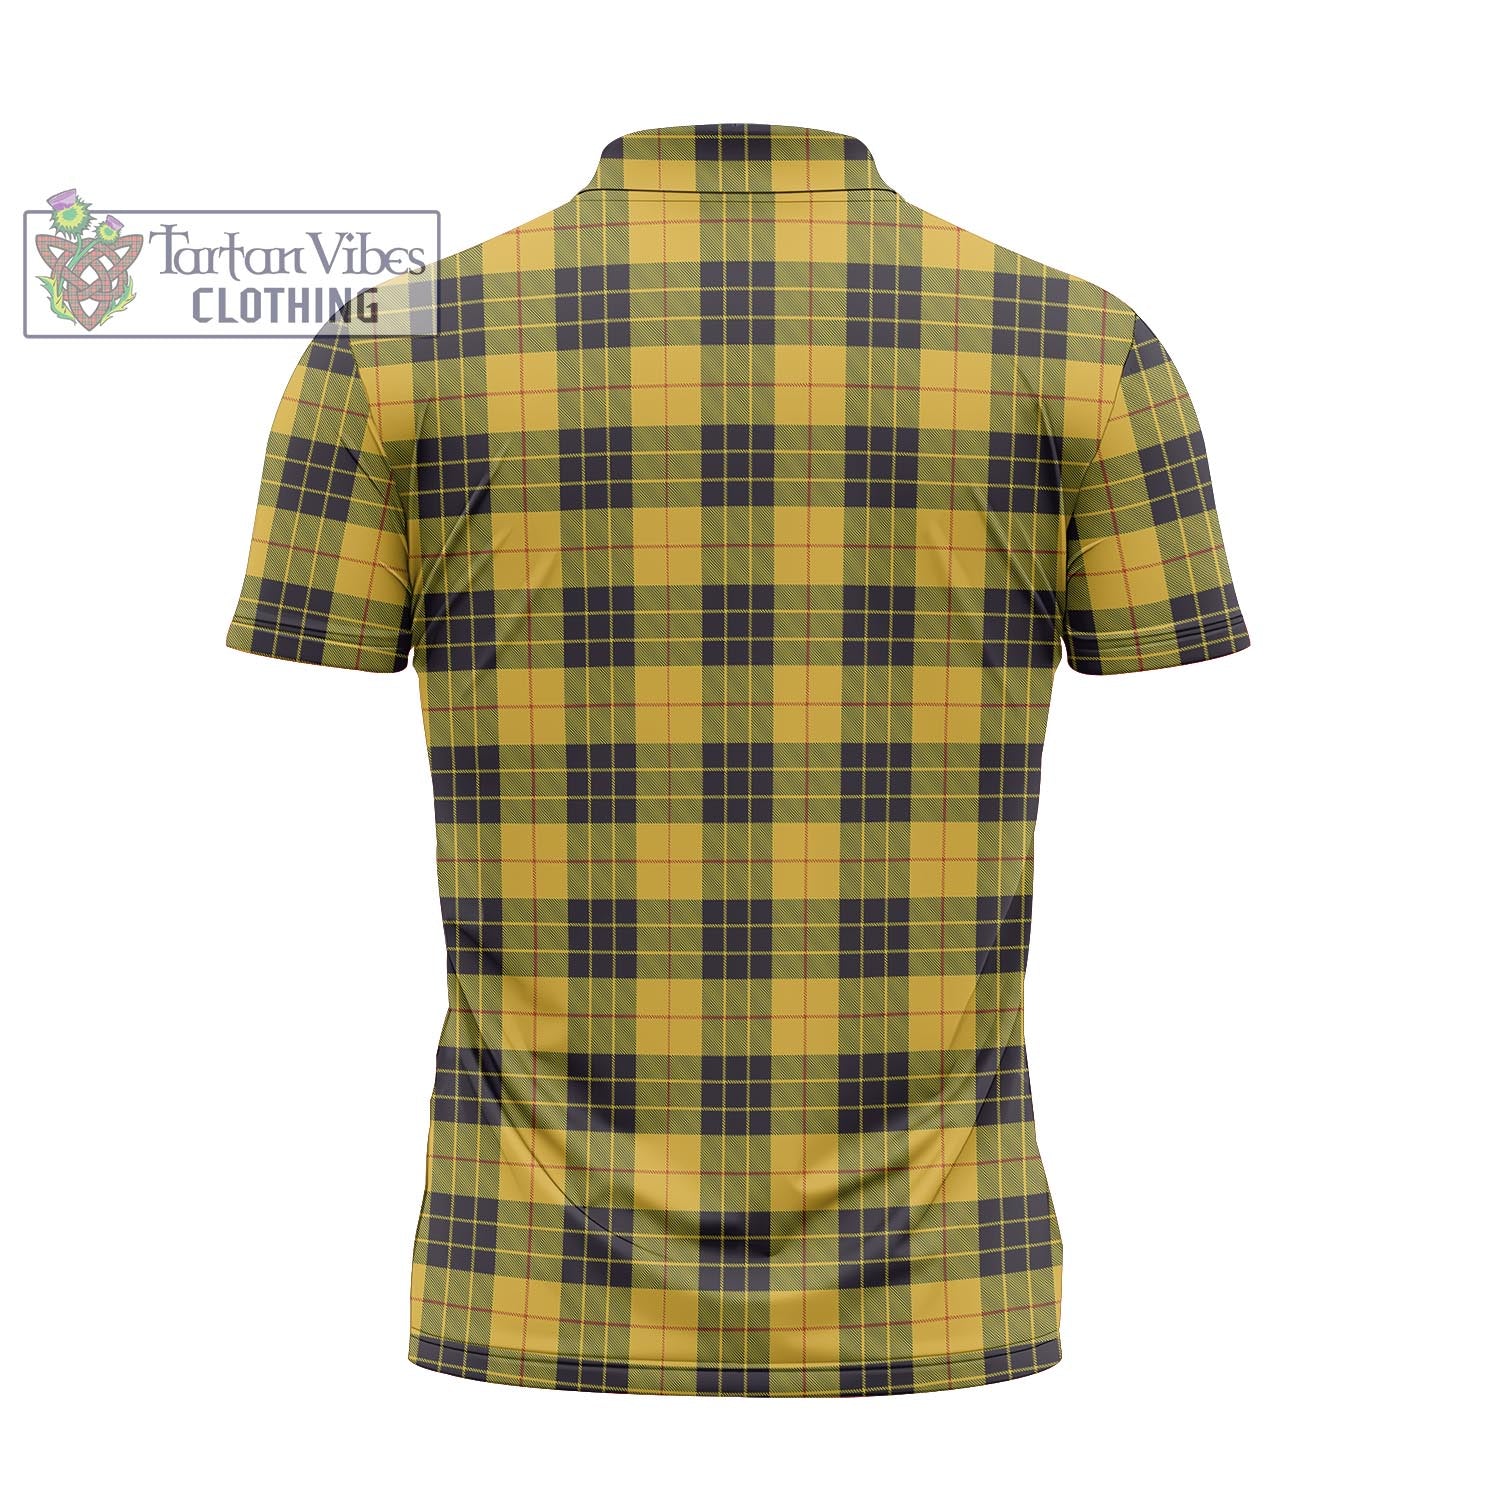 Tartan Vibes Clothing MacLeod of Lewis Ancient Tartan Zipper Polo Shirt with Family Crest